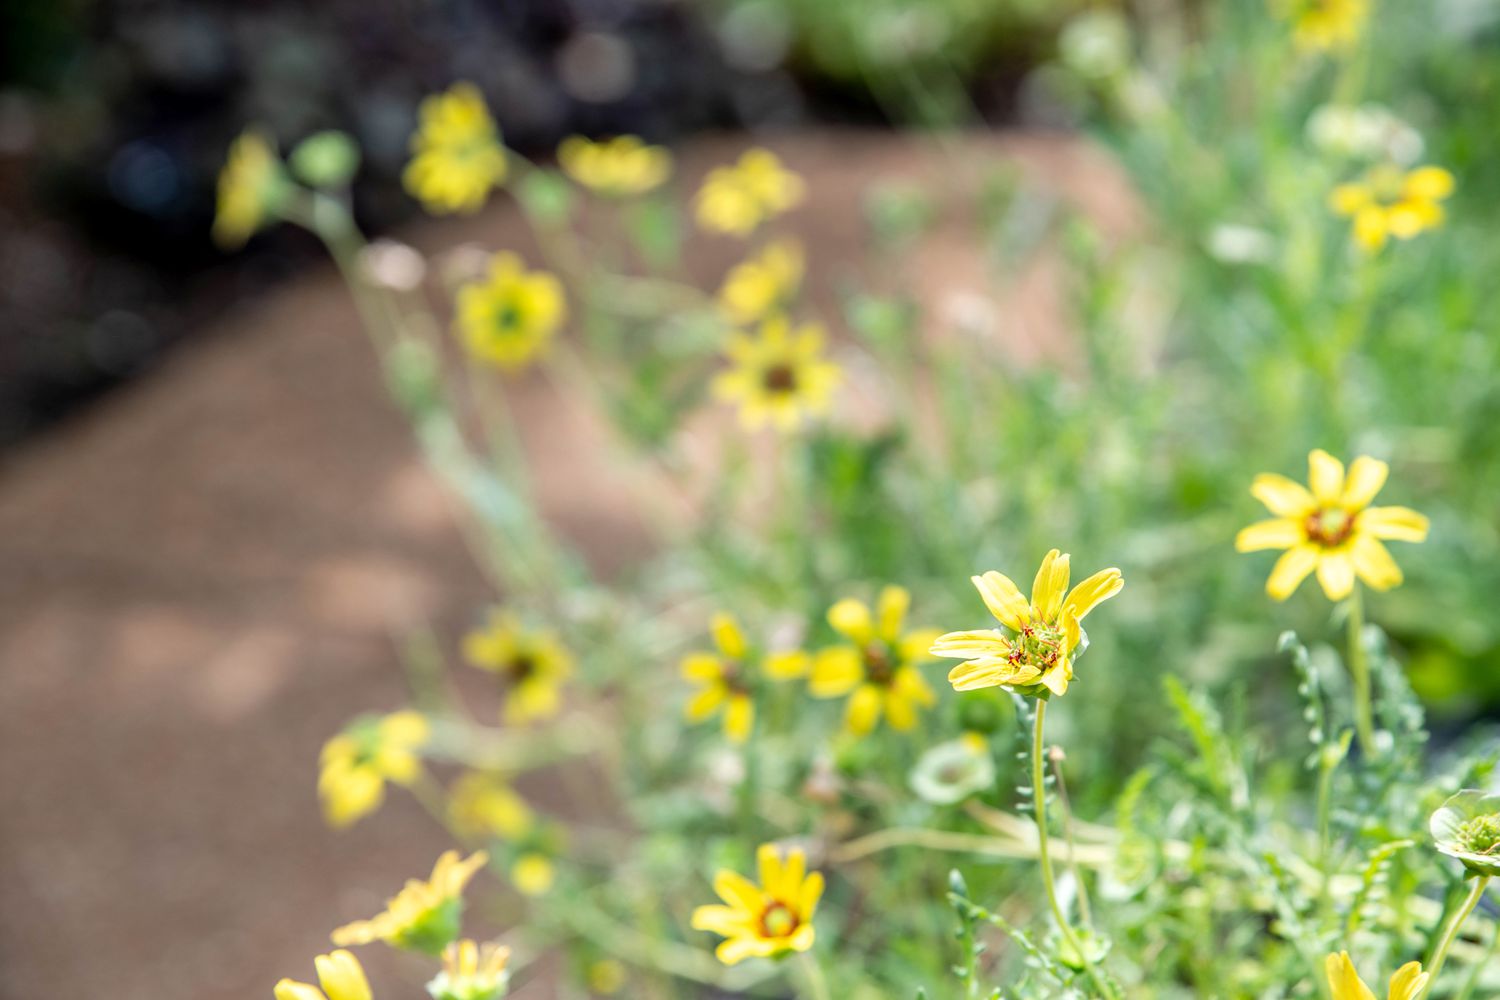 Chocolate daisy flowers on thin stems and small yellow petals in sunlight